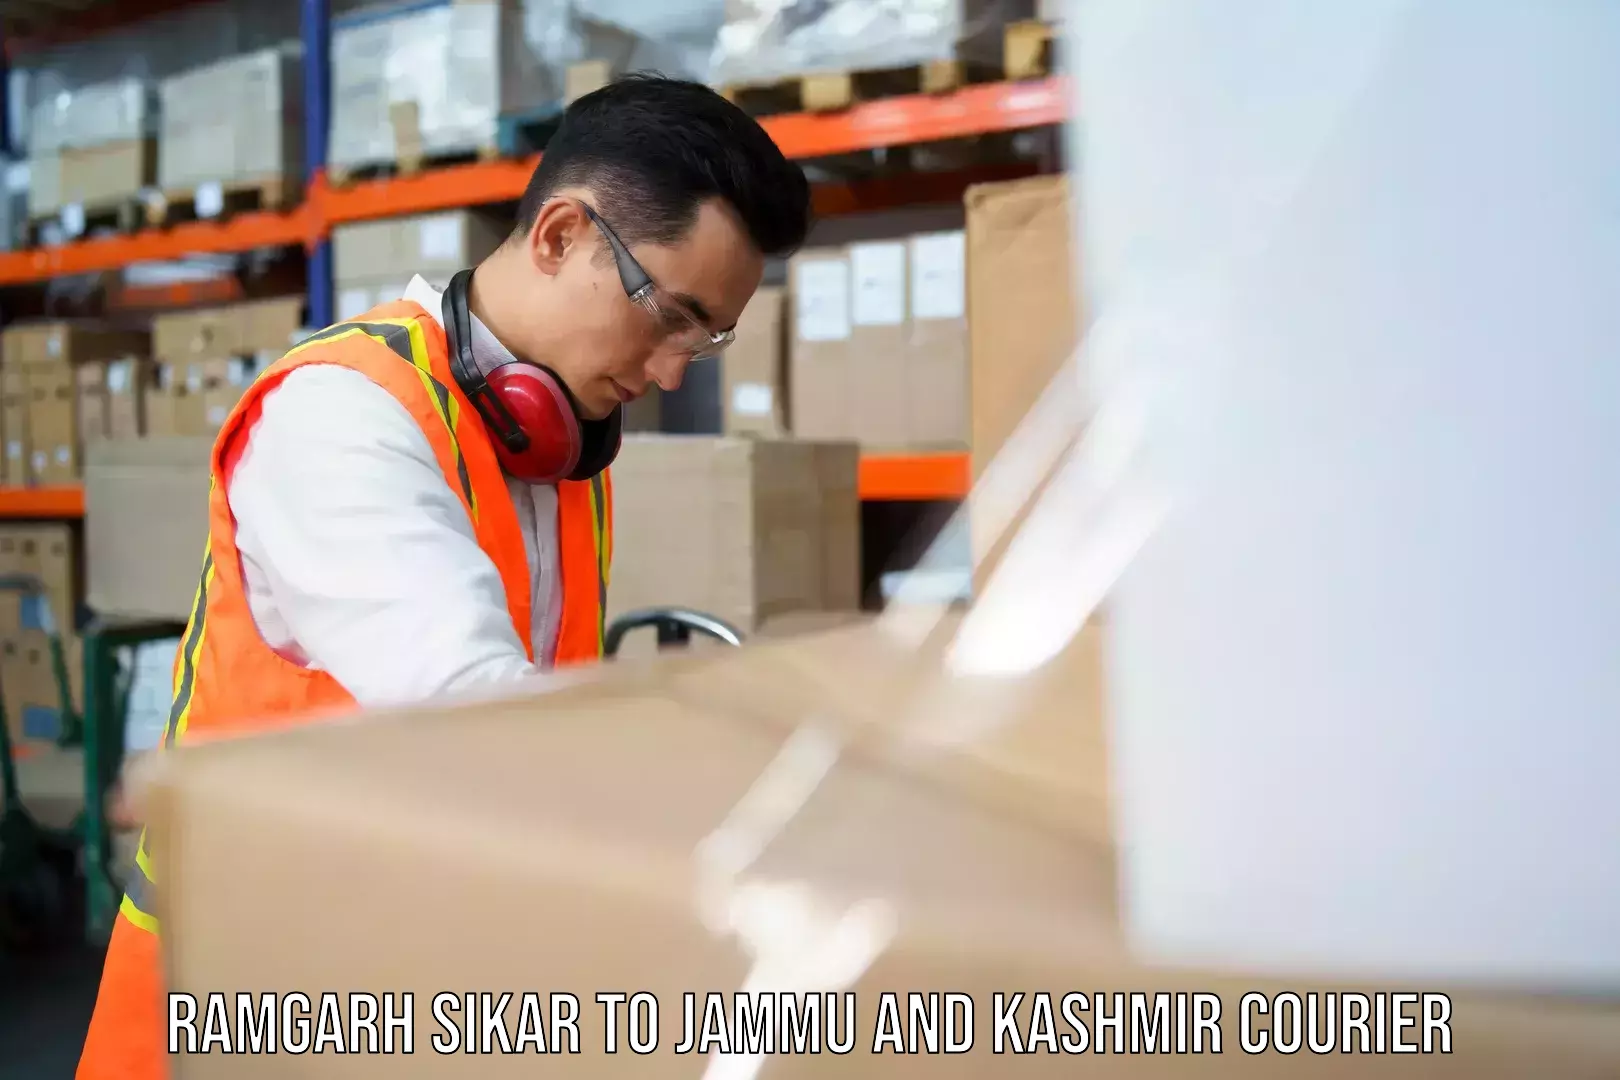 Large-scale shipping solutions Ramgarh Sikar to Kargil